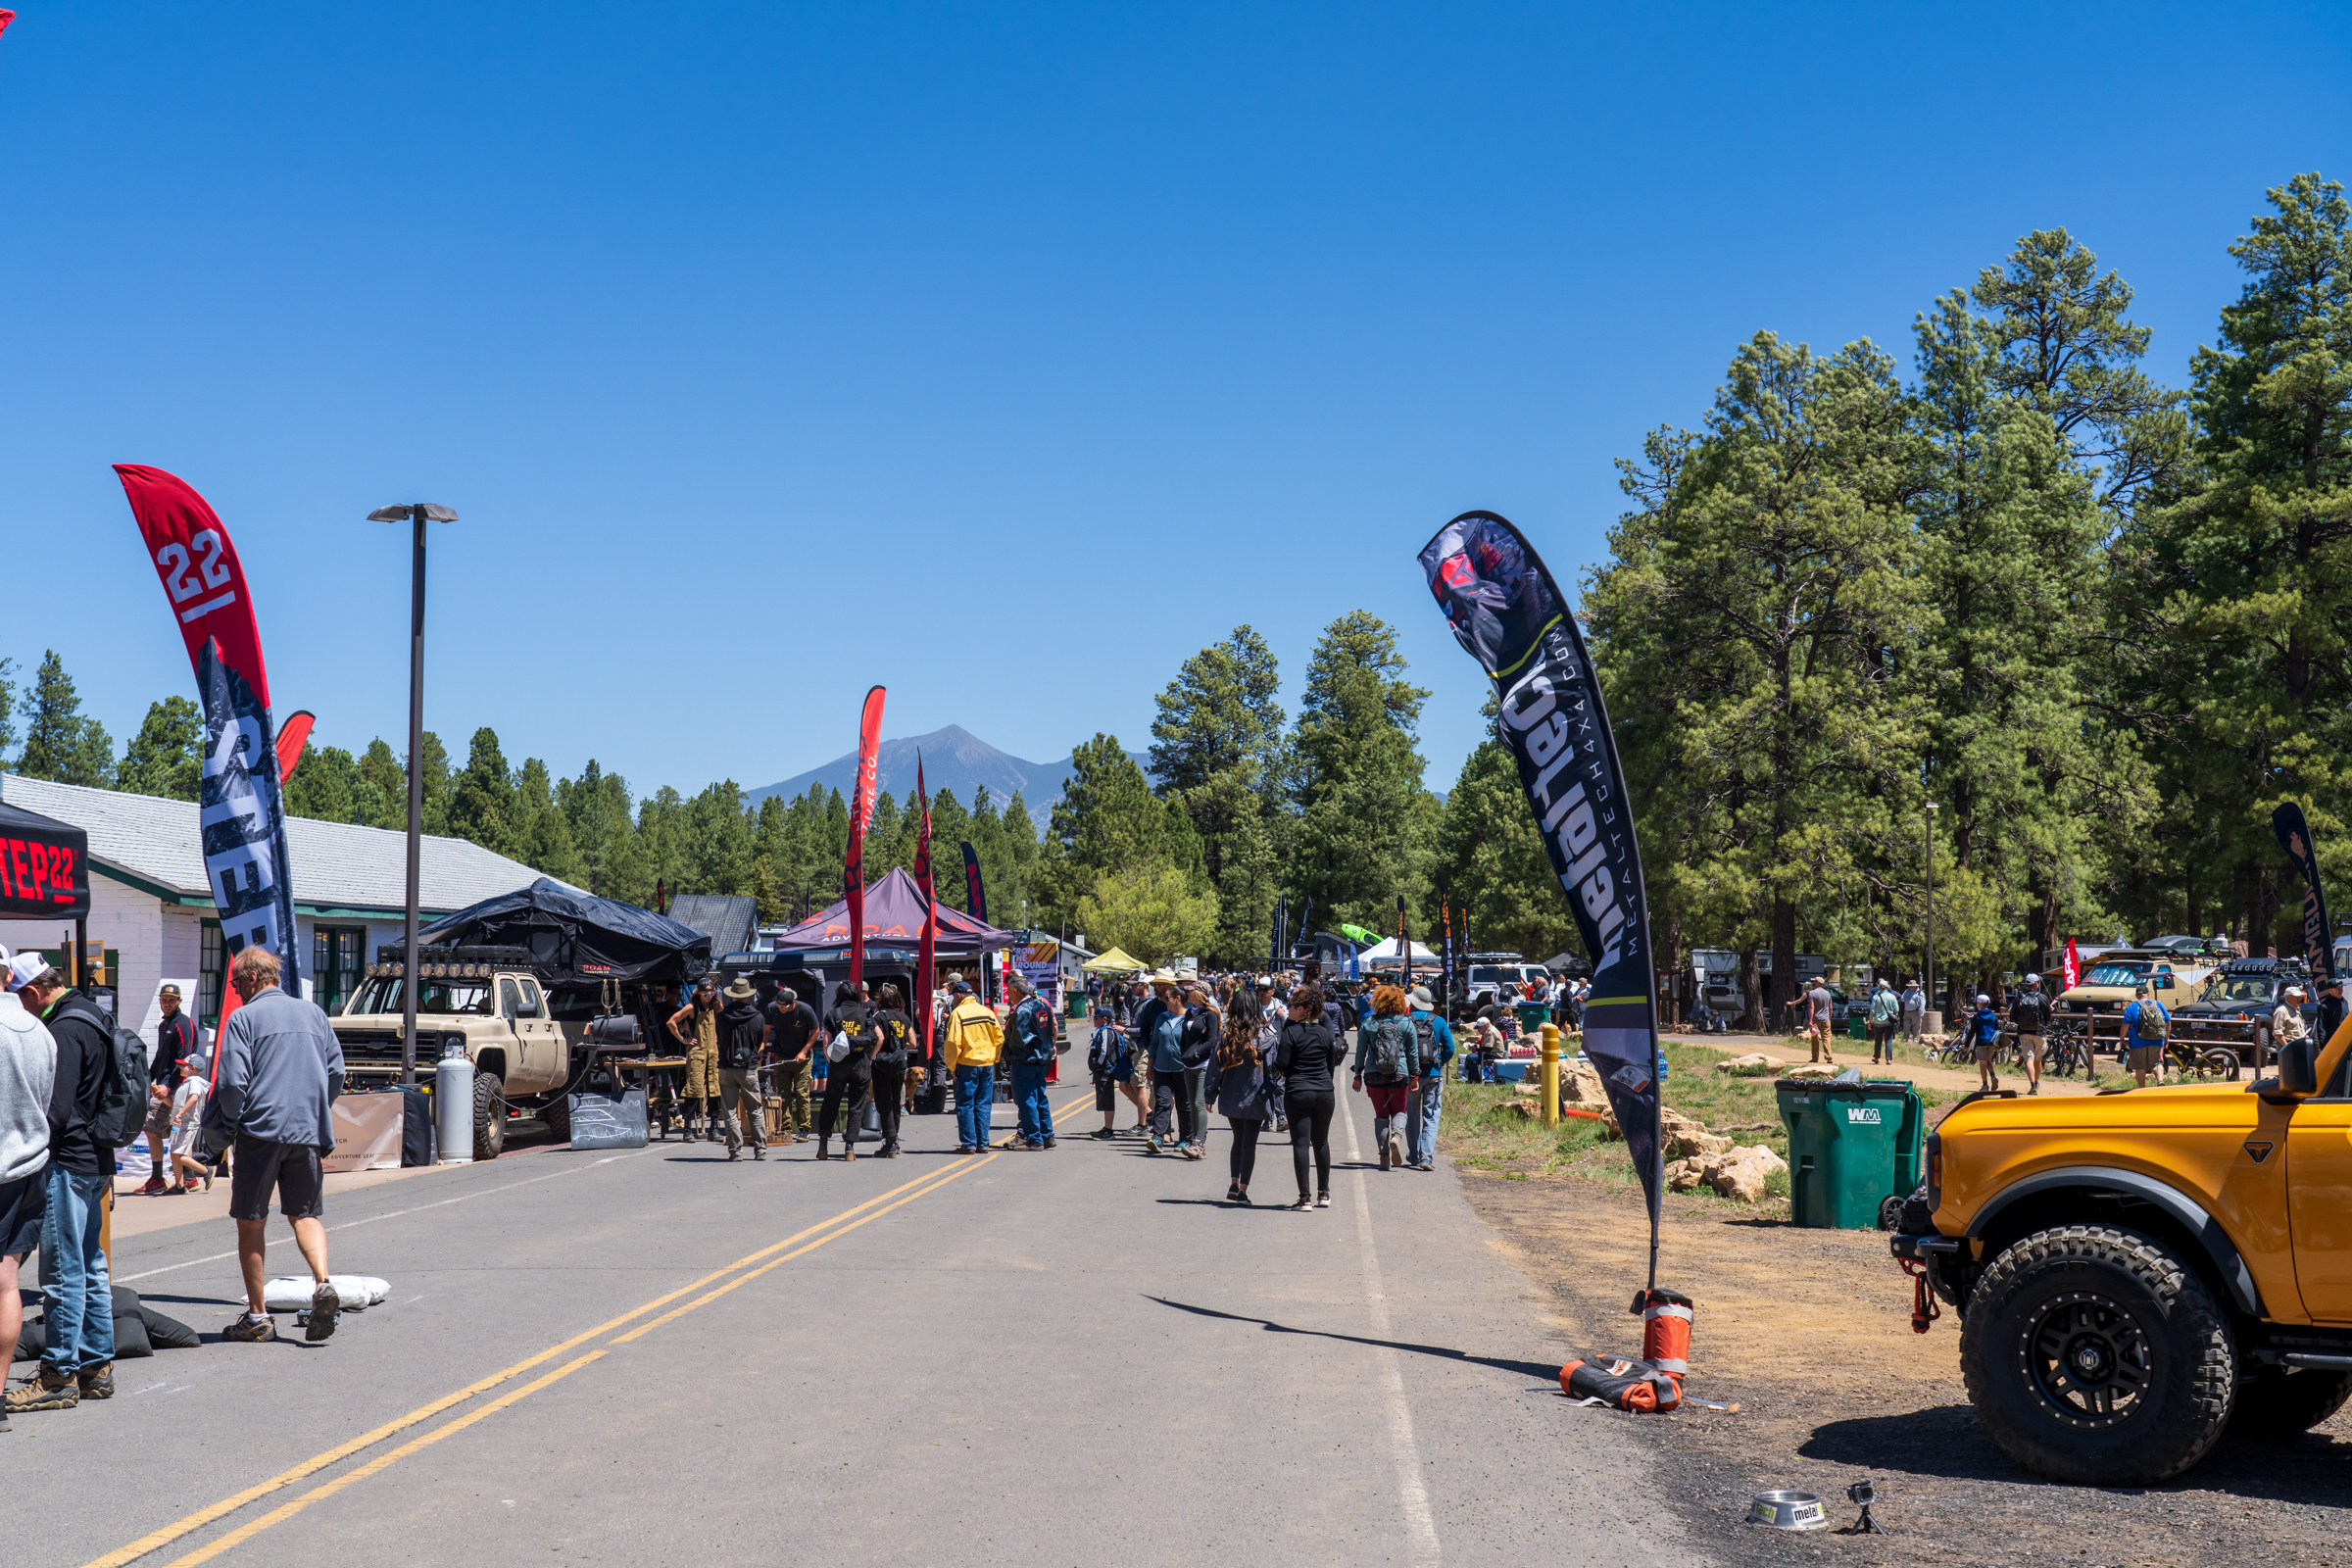 Overland Expo West 2022